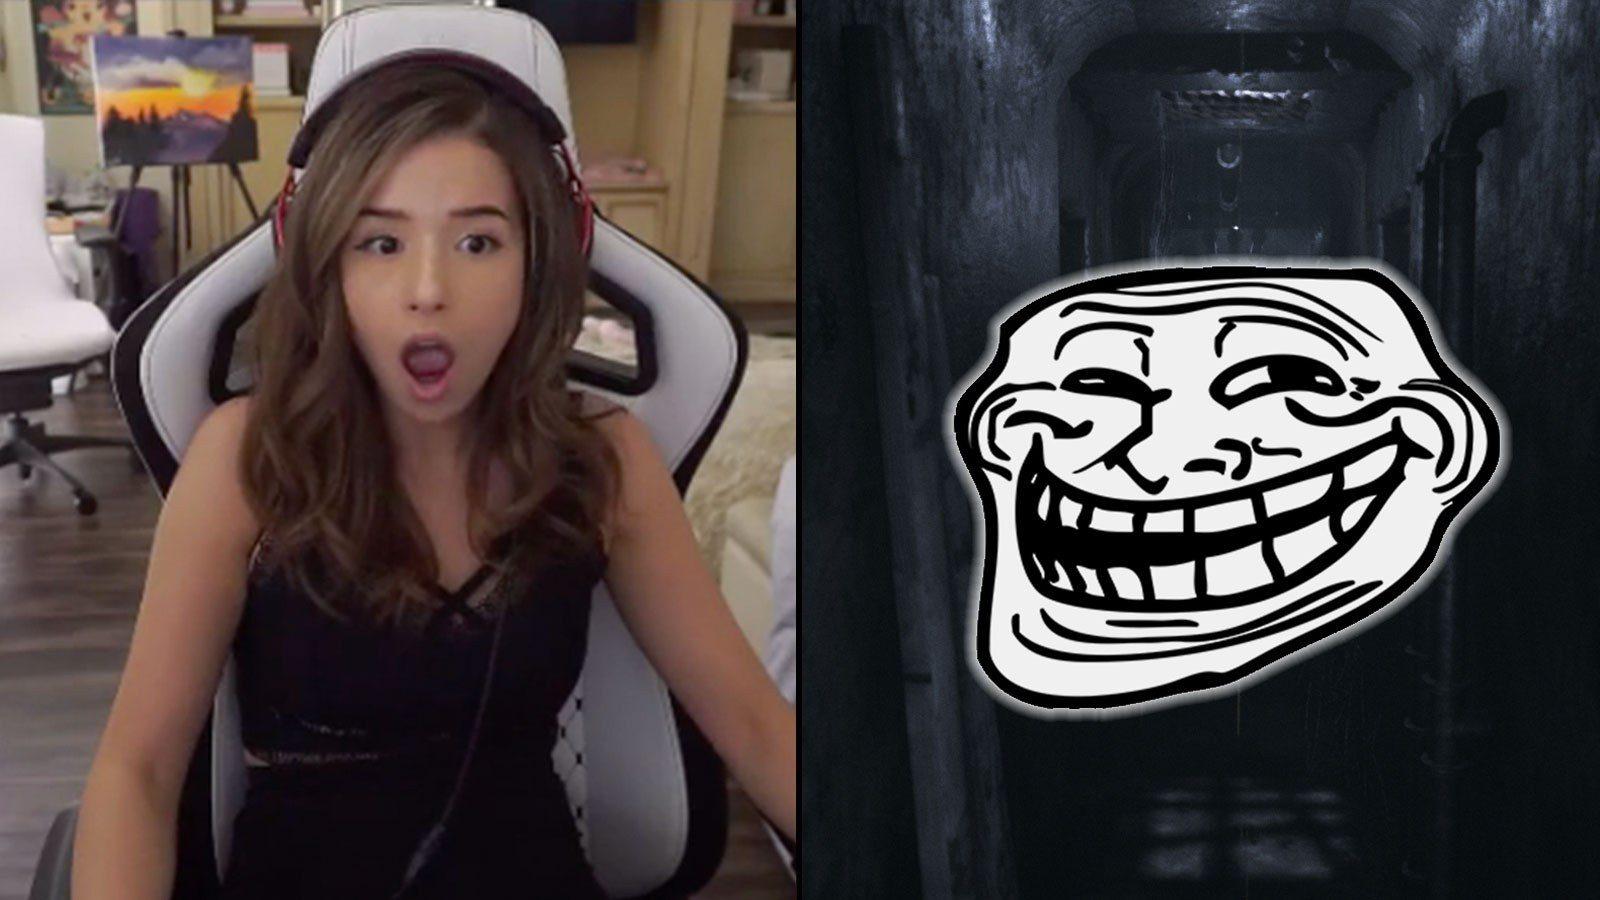 Twitch troll scares streamer with classic jump scare donation - Dexerto